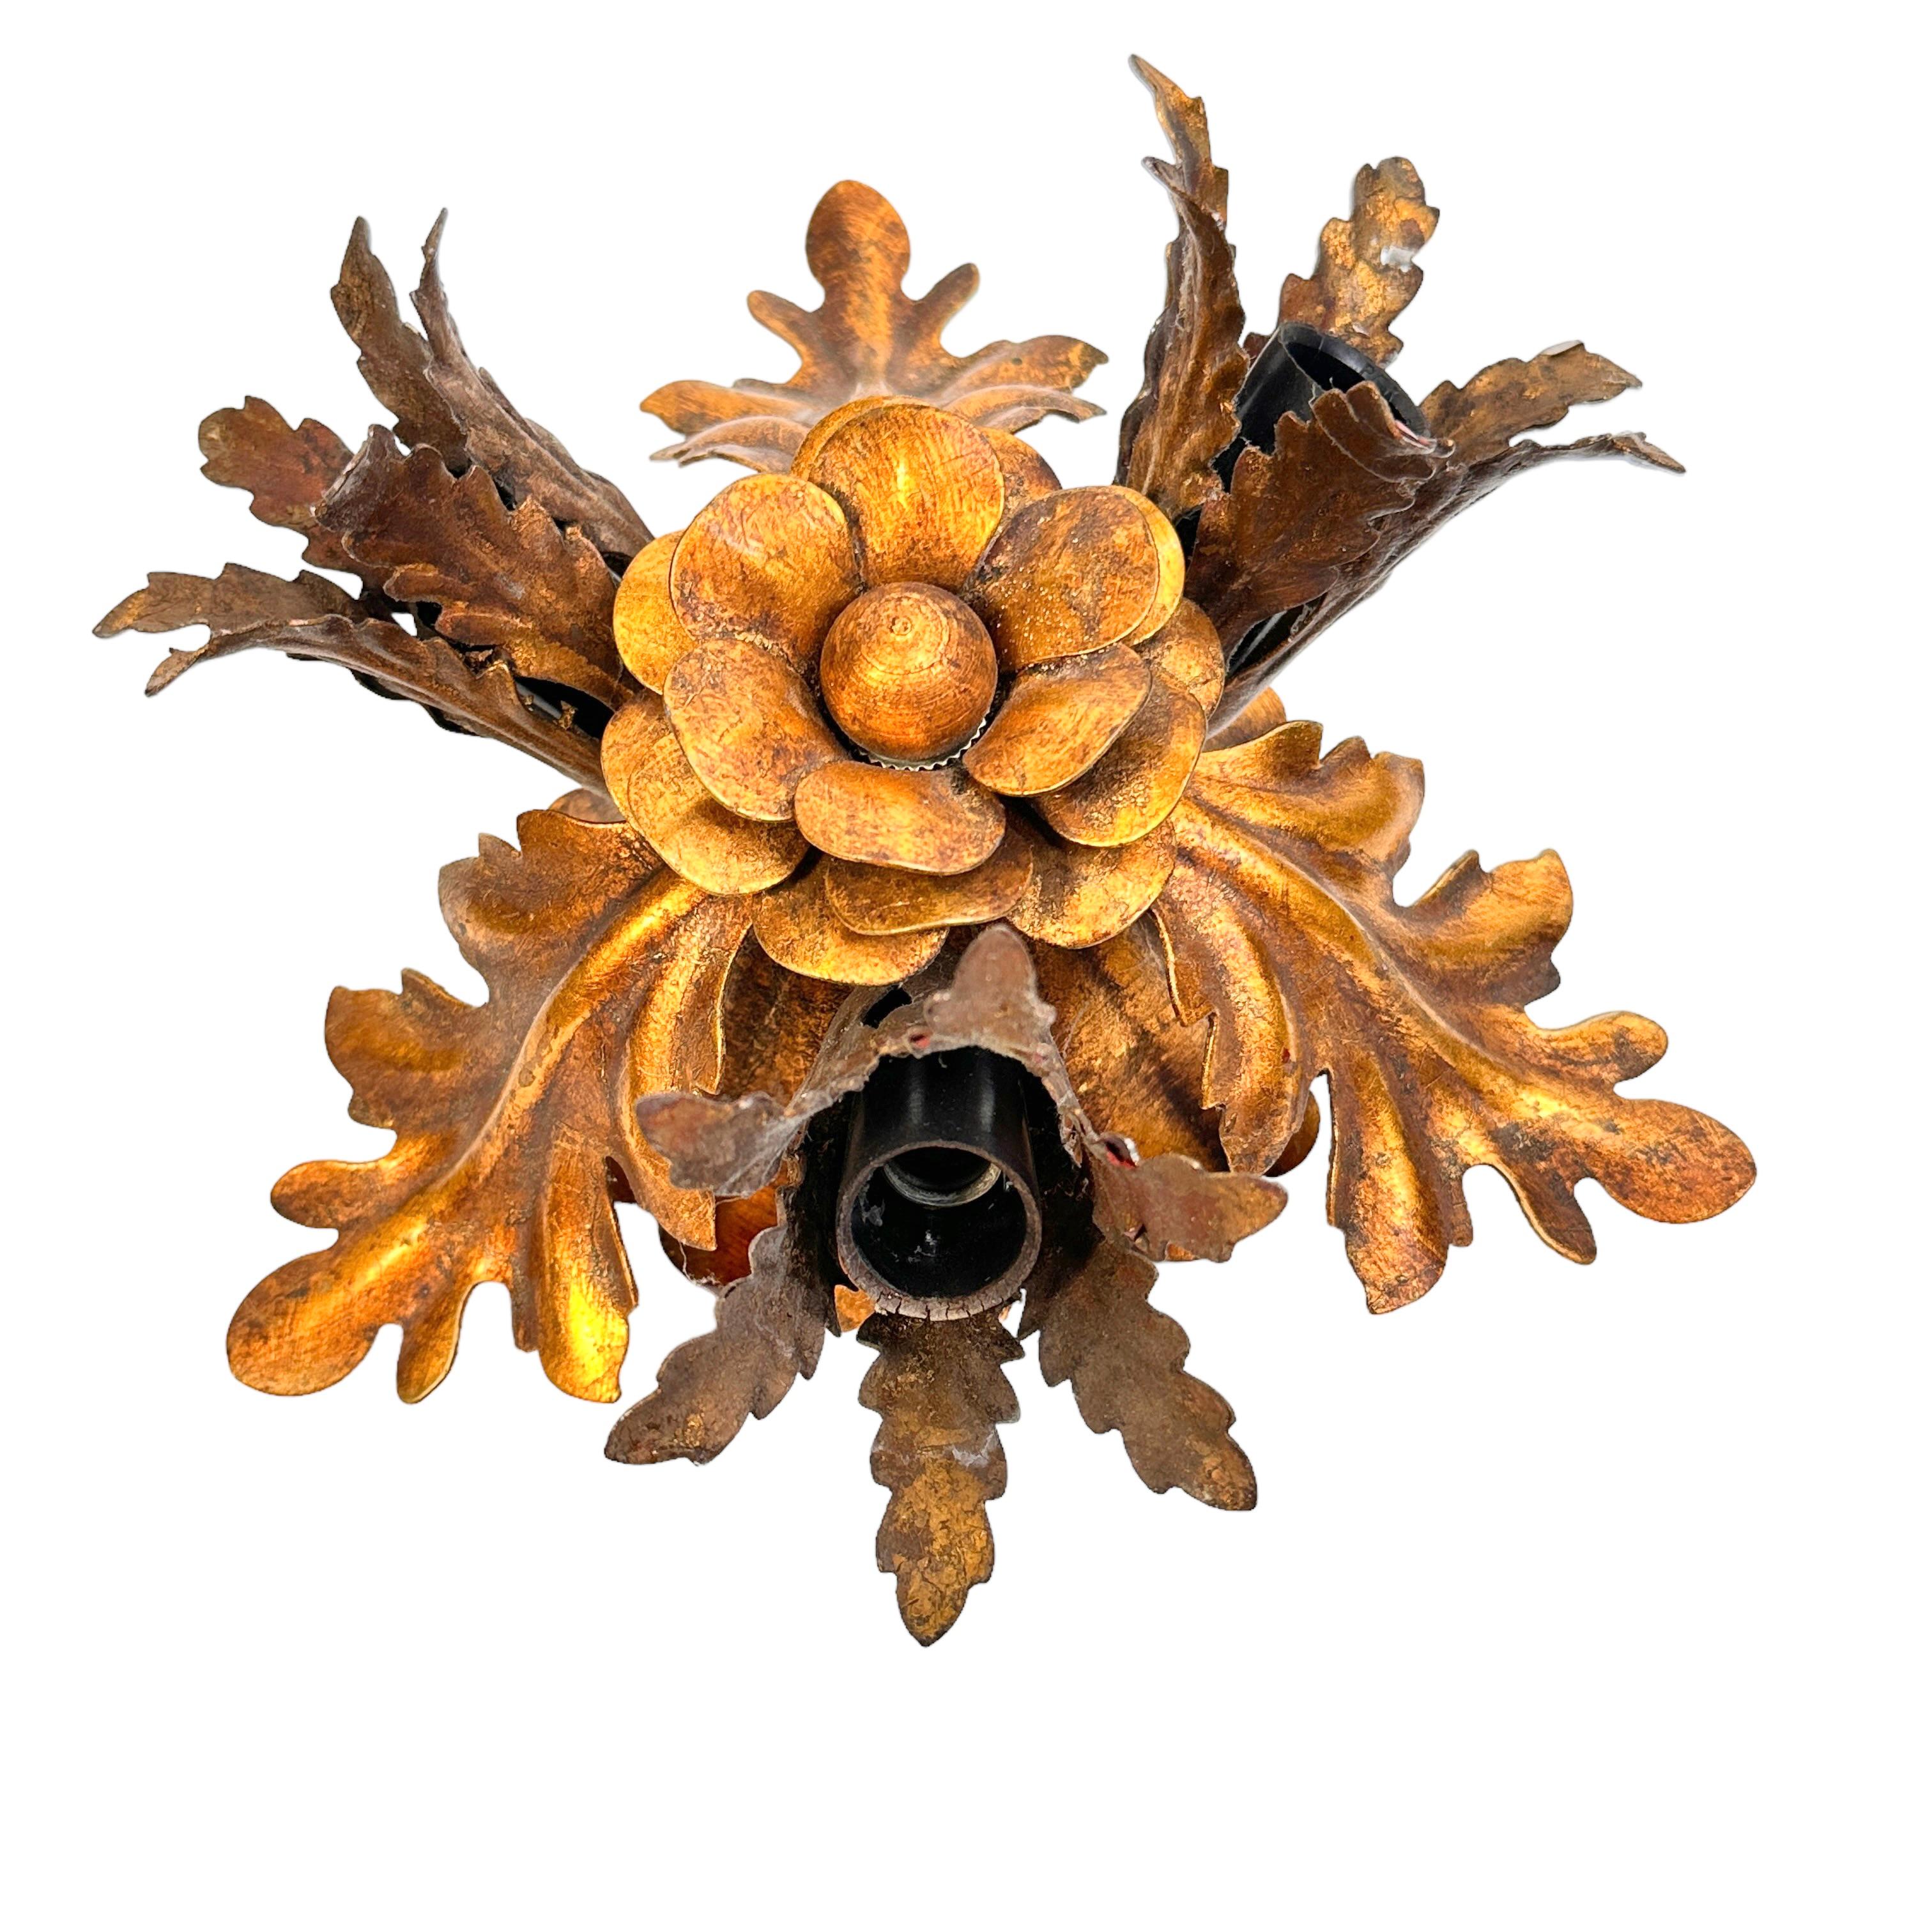 Add a touch of opulence to your home with this charming flush mount light. Perfect stunning gilt leaf and flower design to enhance any chic or eclectic home. We'd love to see it hanging in an entryway as a charming welcome home. You can also use it